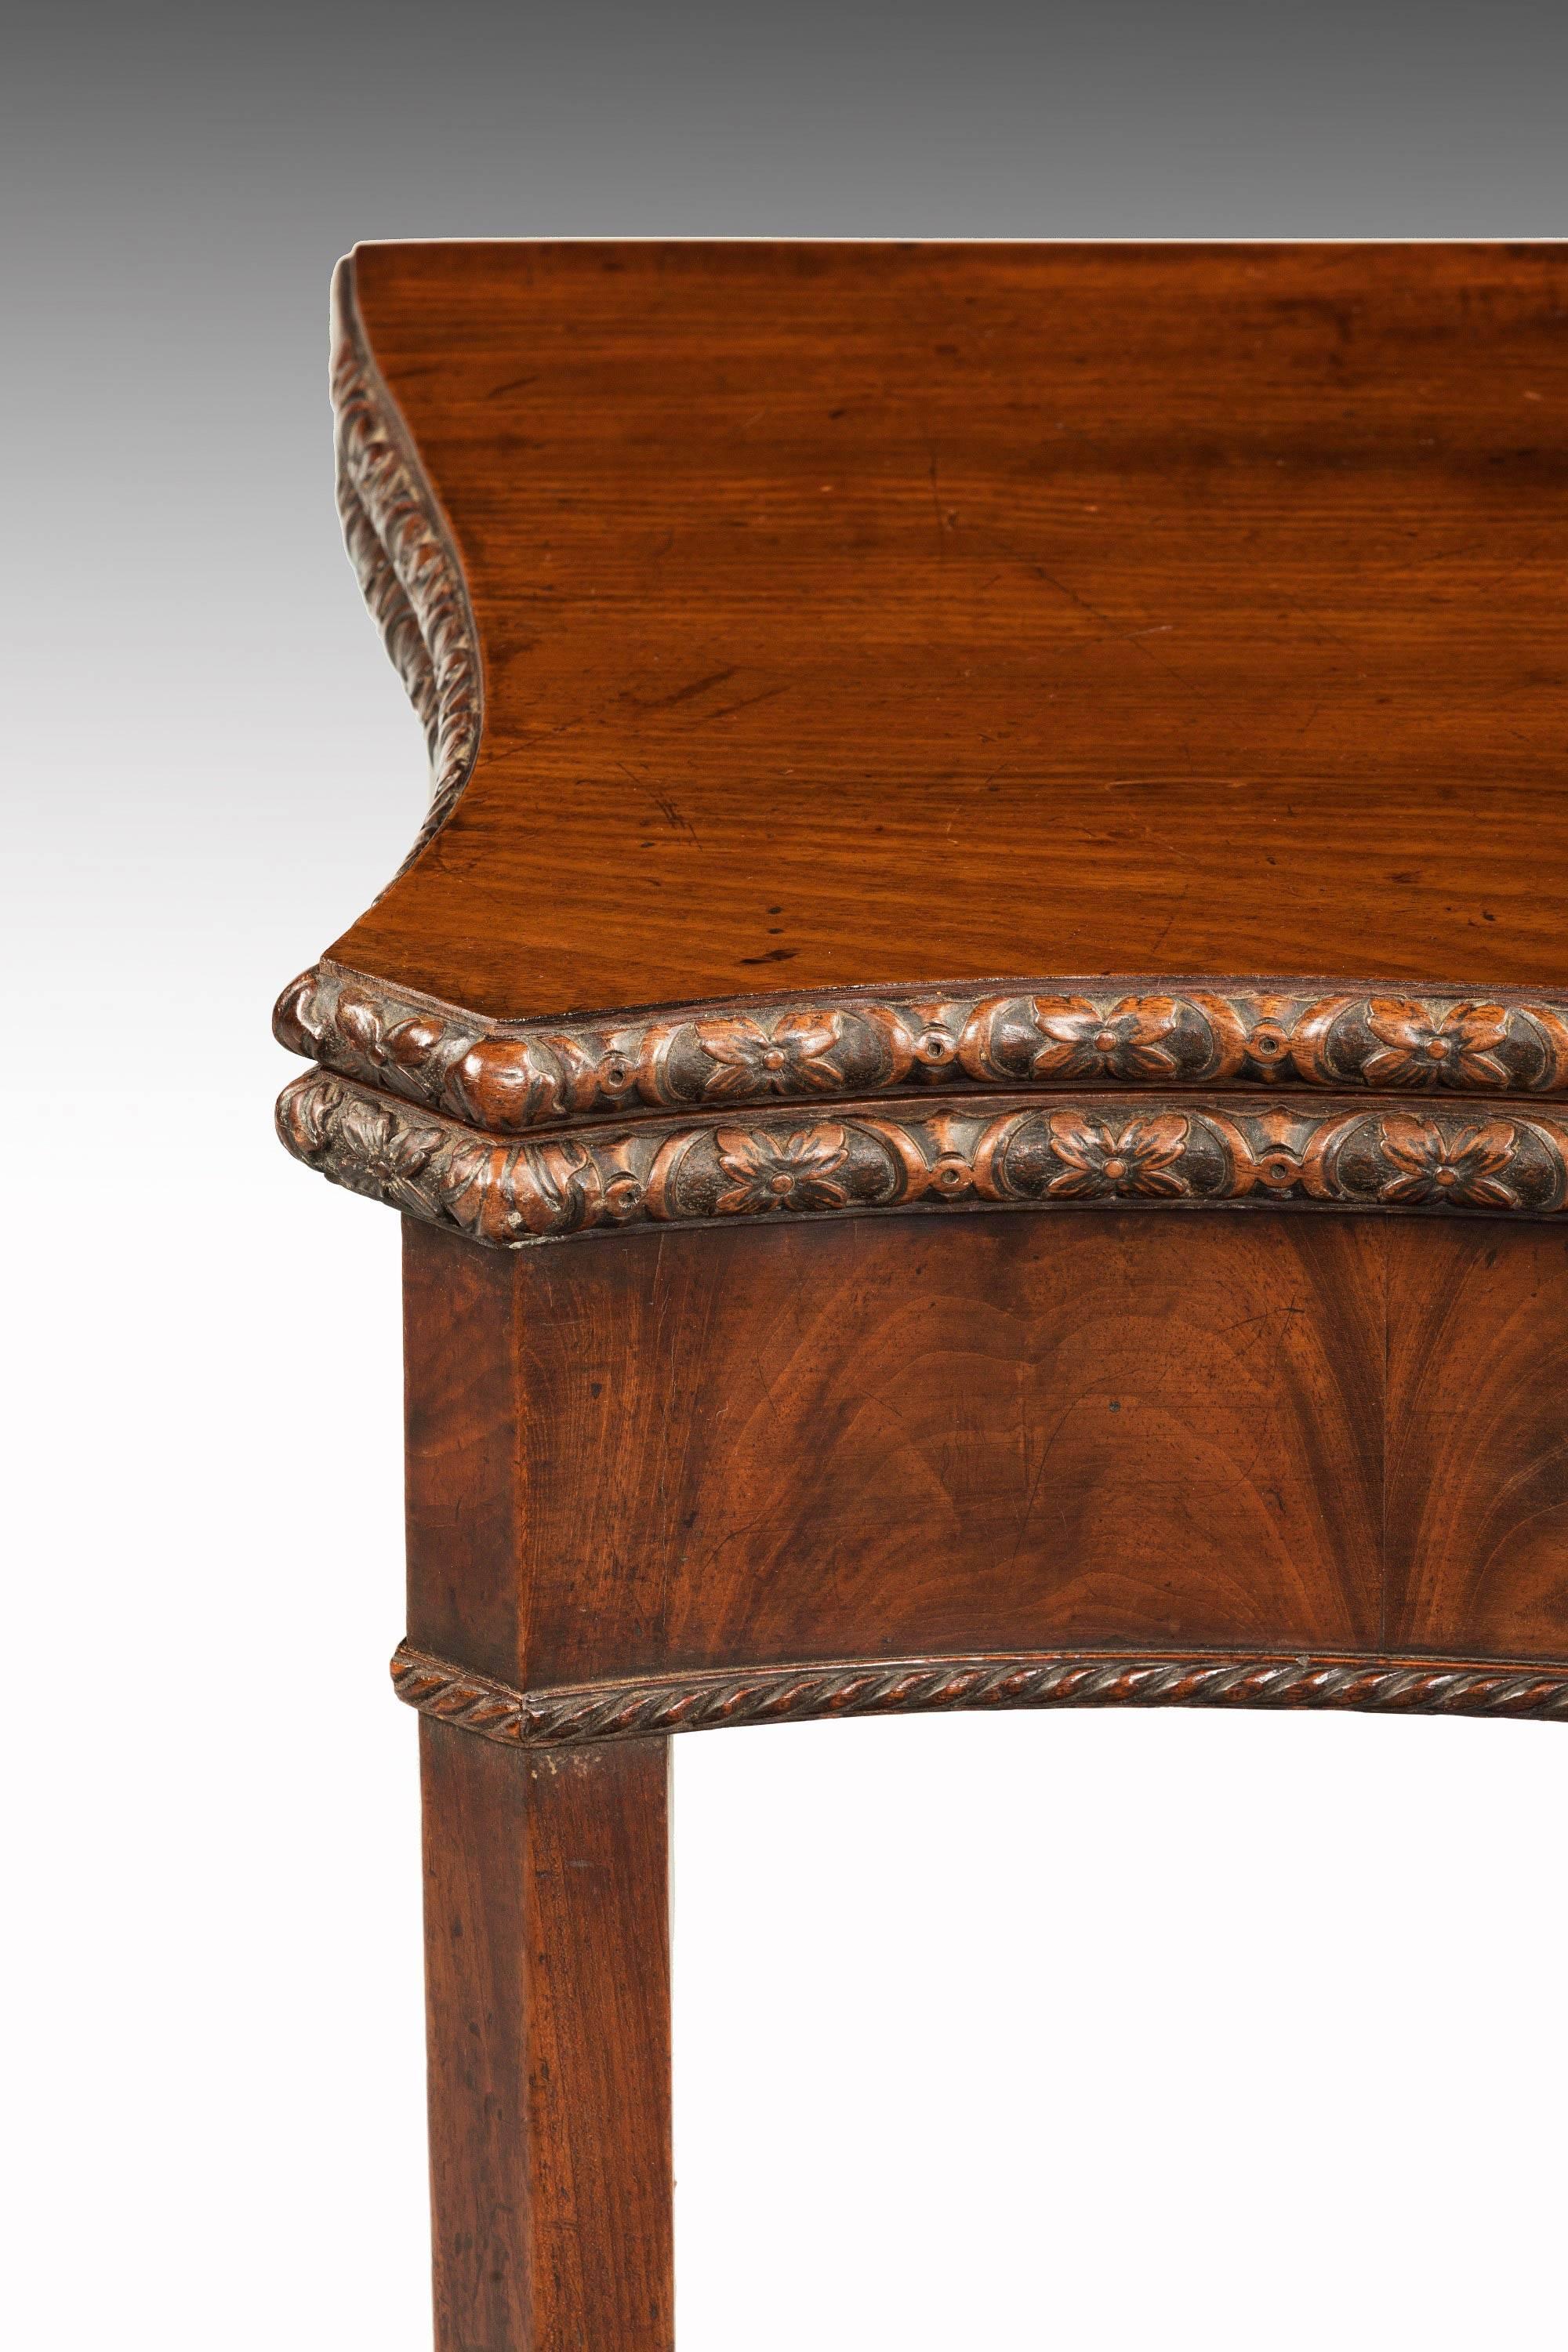 English Chippendale Period Tea Table of Serpentine Outline